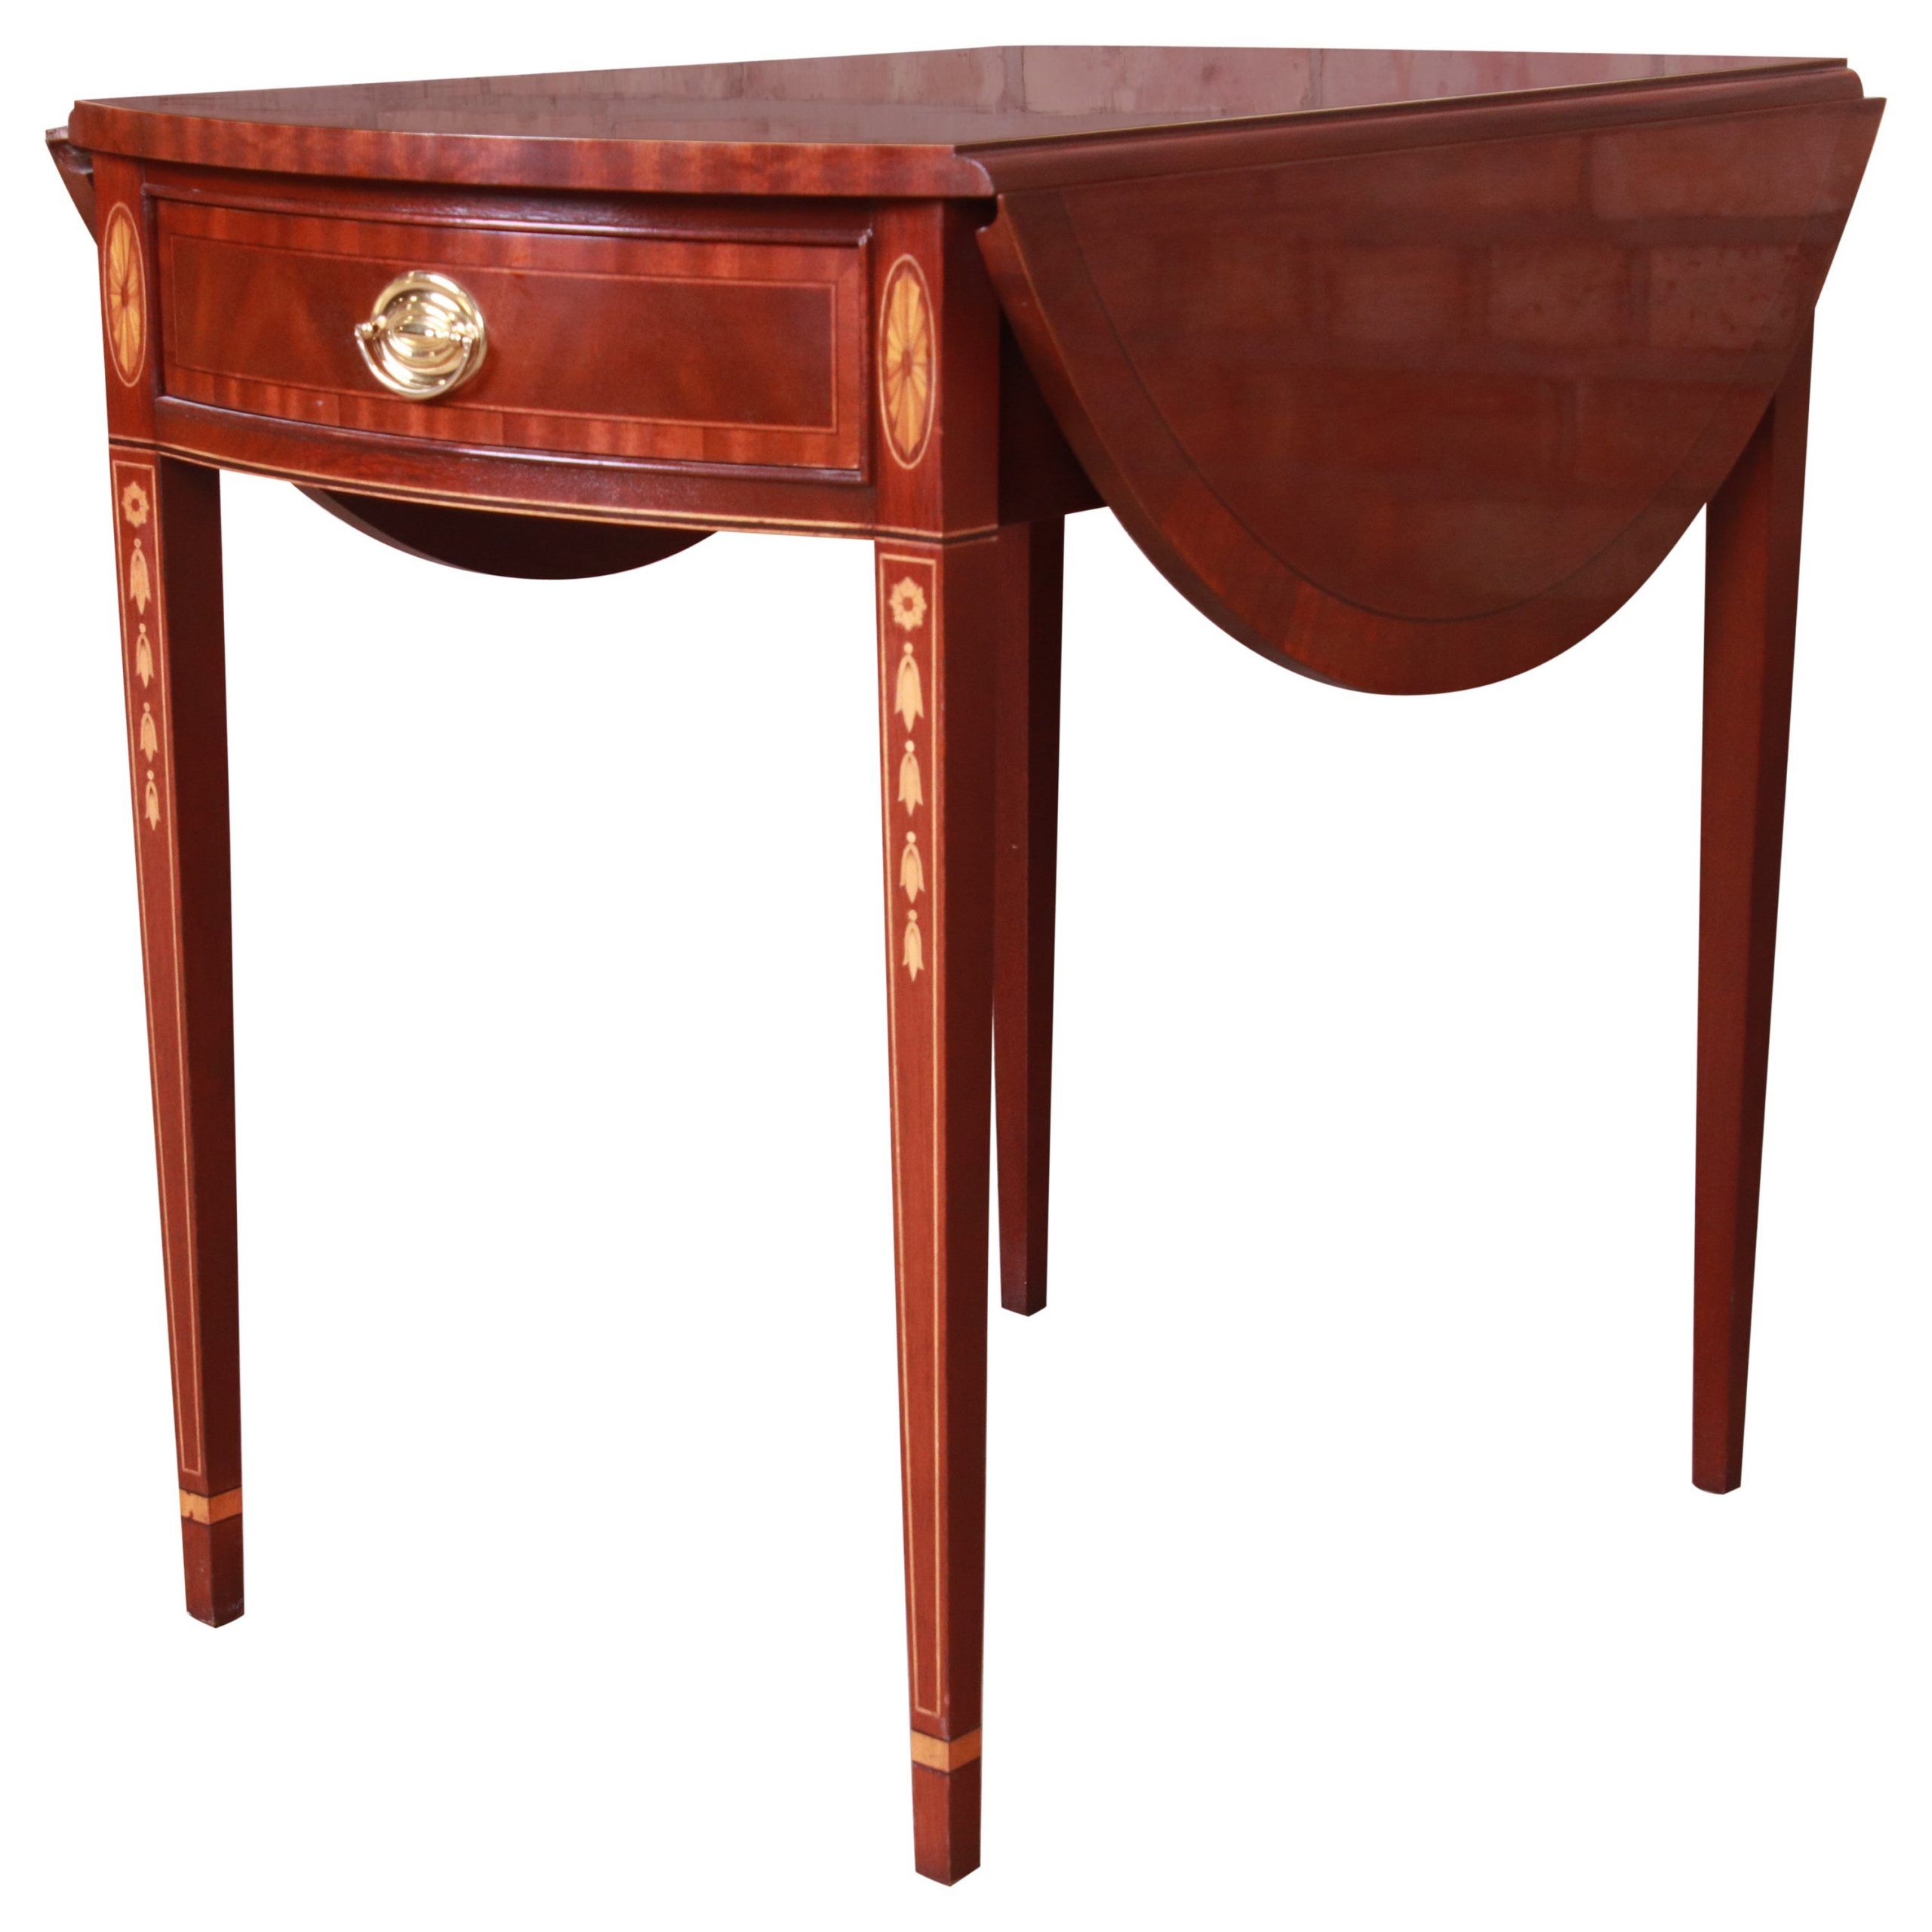 Very Pretty Small Oval Flame Mahogany Coffee Table Or Side Intended For 2 Drawer Oval Coffee Tables (Photo 2 of 15)